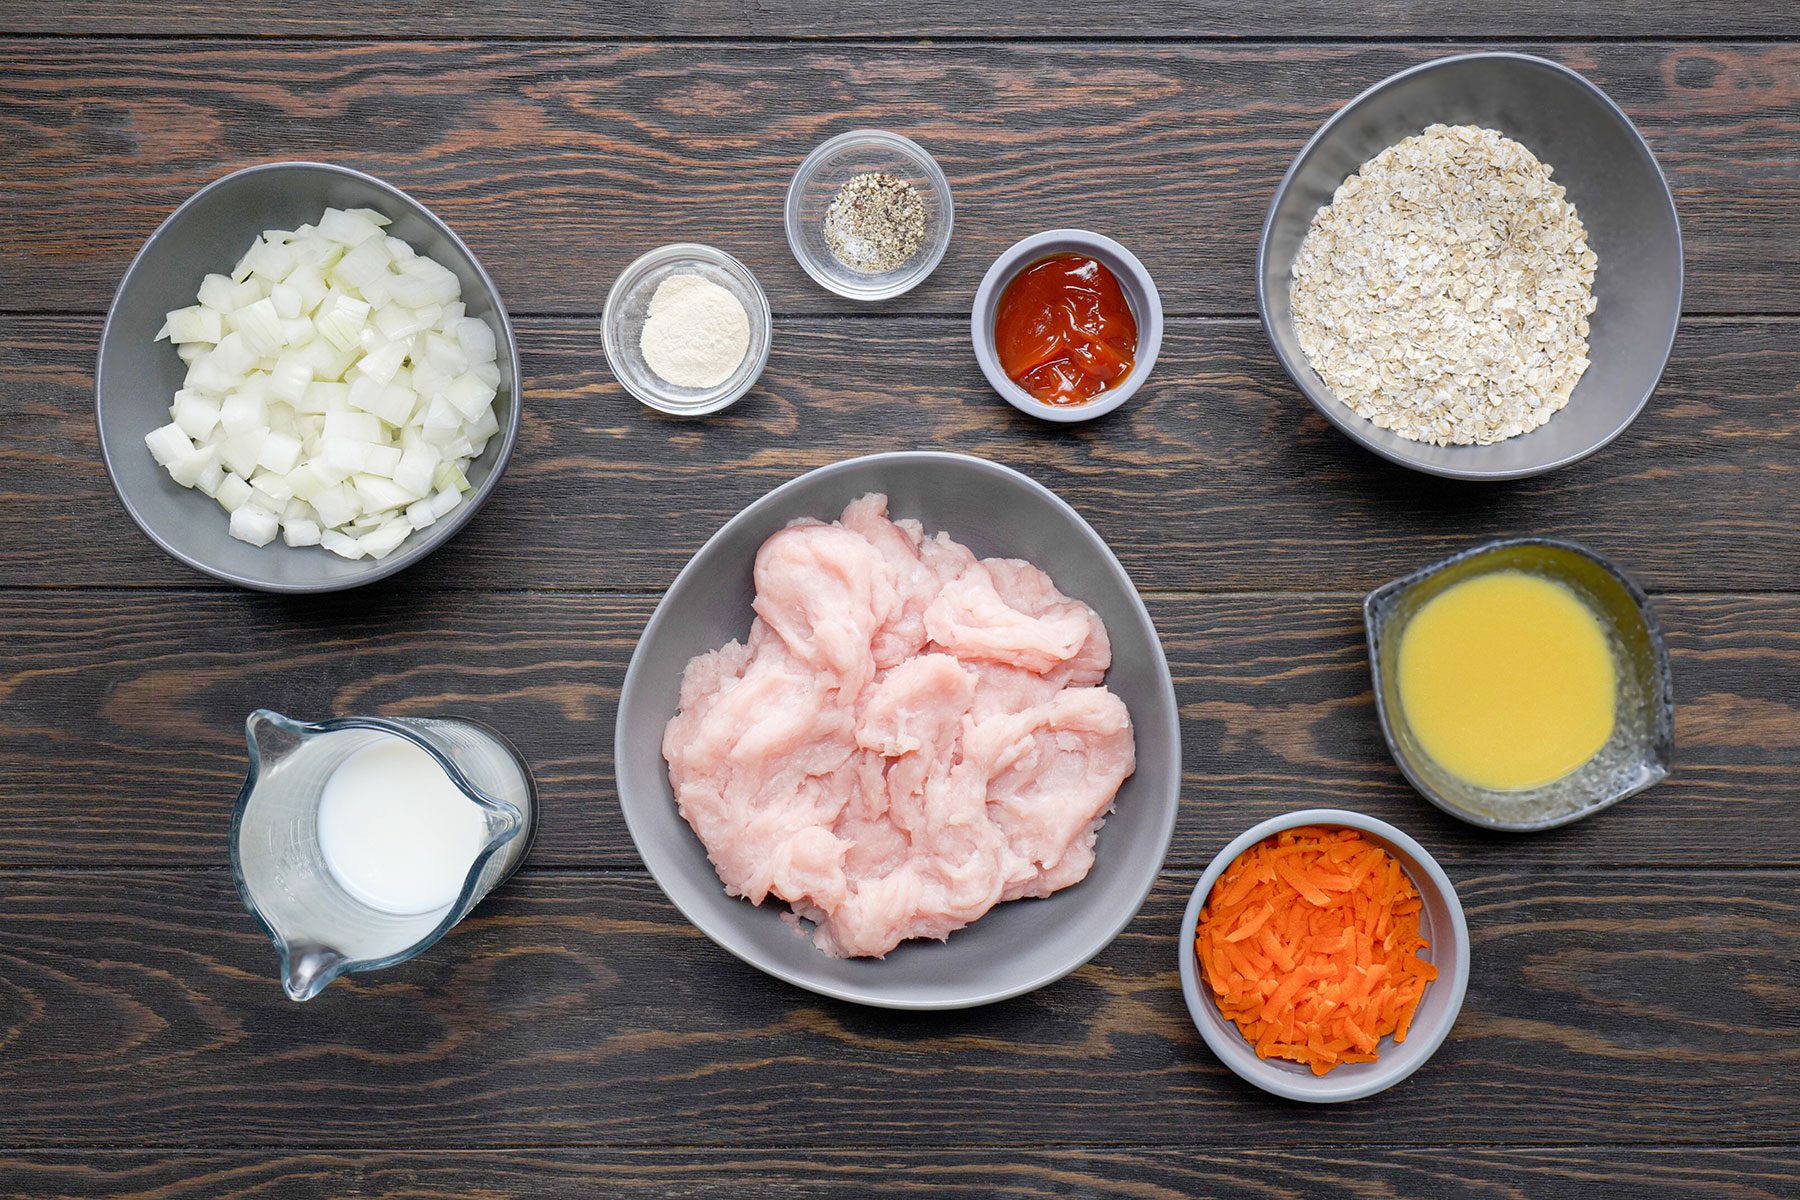 Ingredients for Turkey Meat Loaf on wooden surface